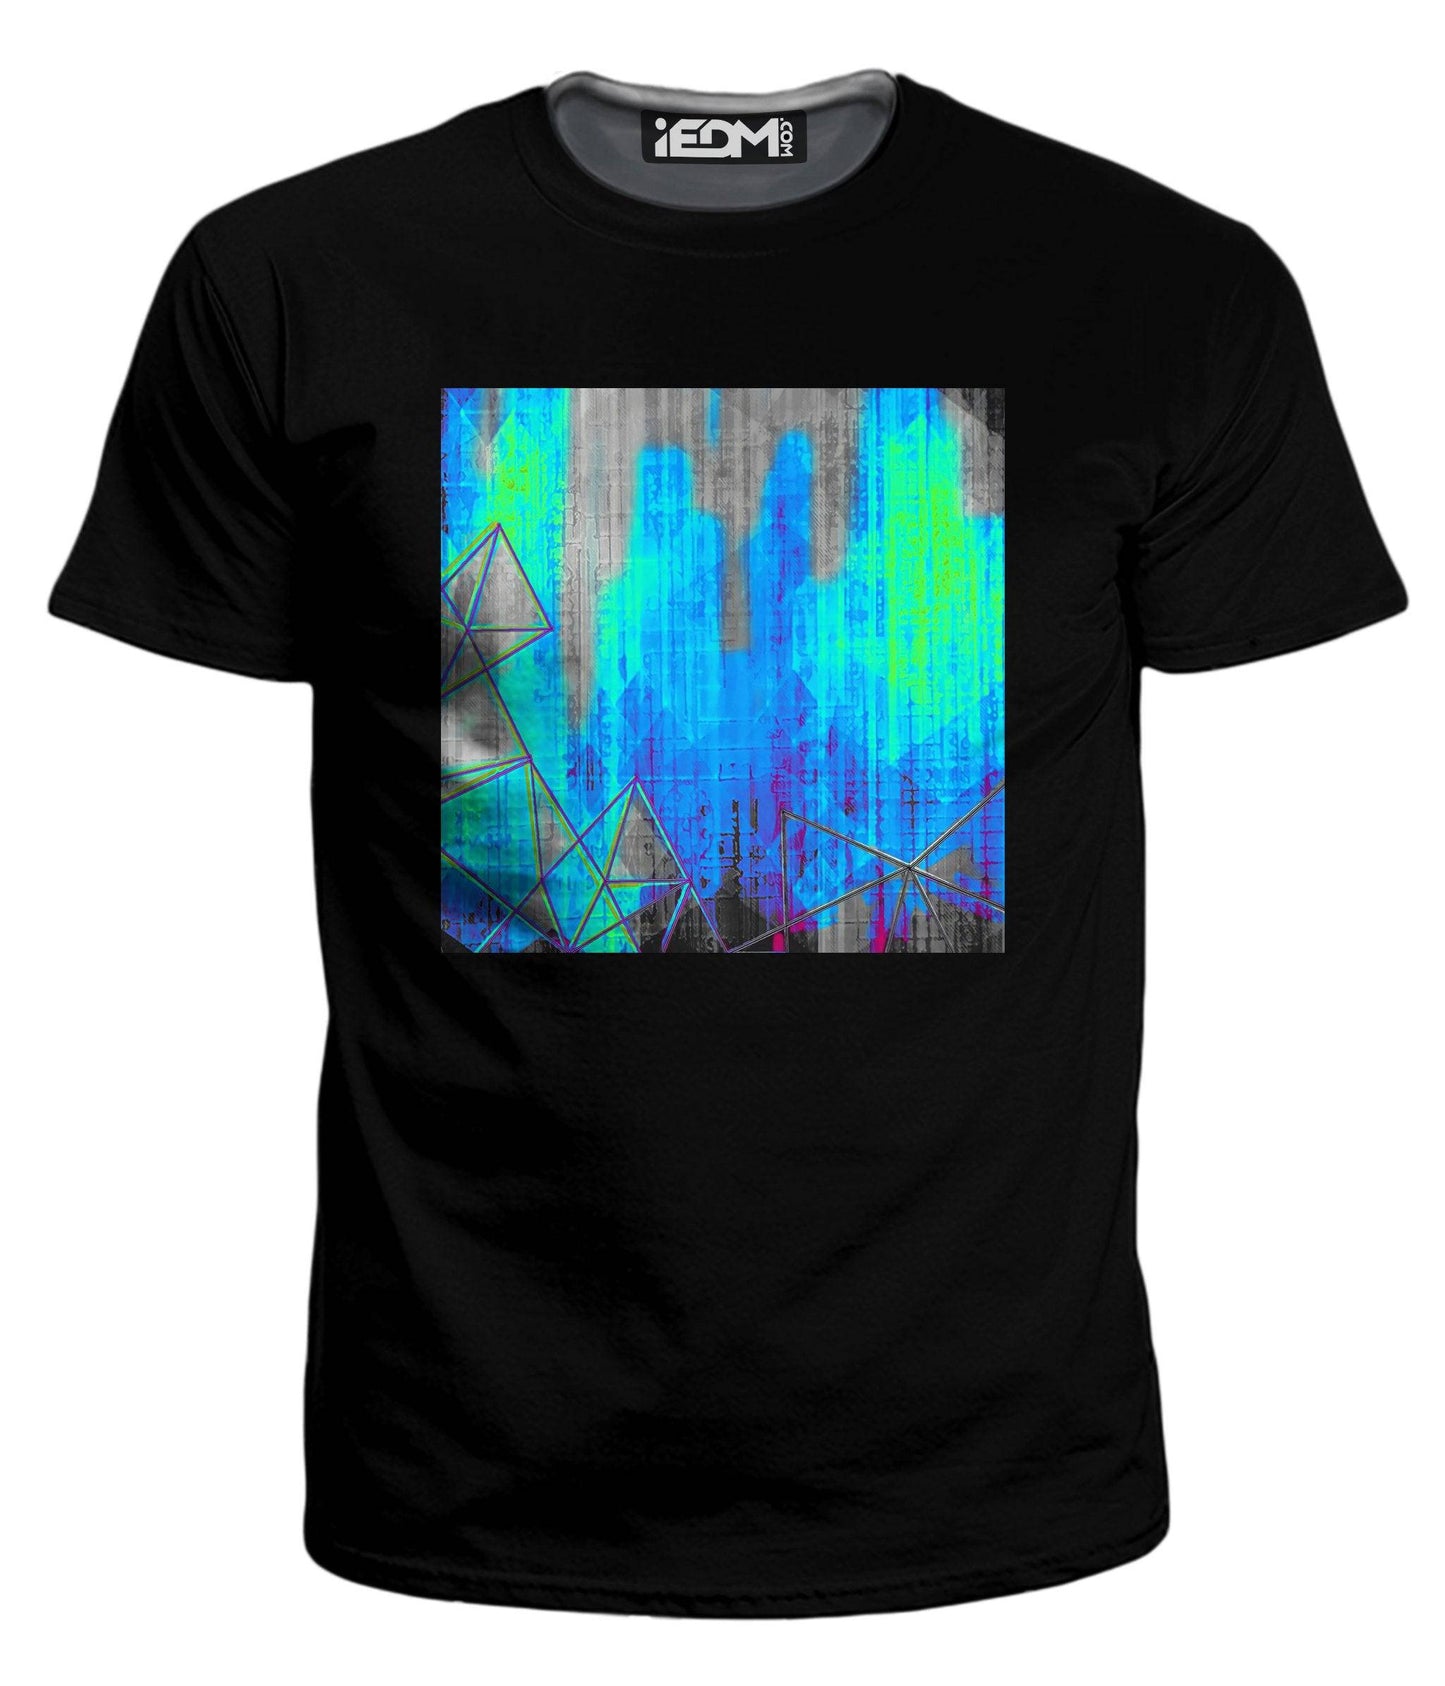 Timmay Men's Graphic T-Shirt, CrazyKona, | iEDM